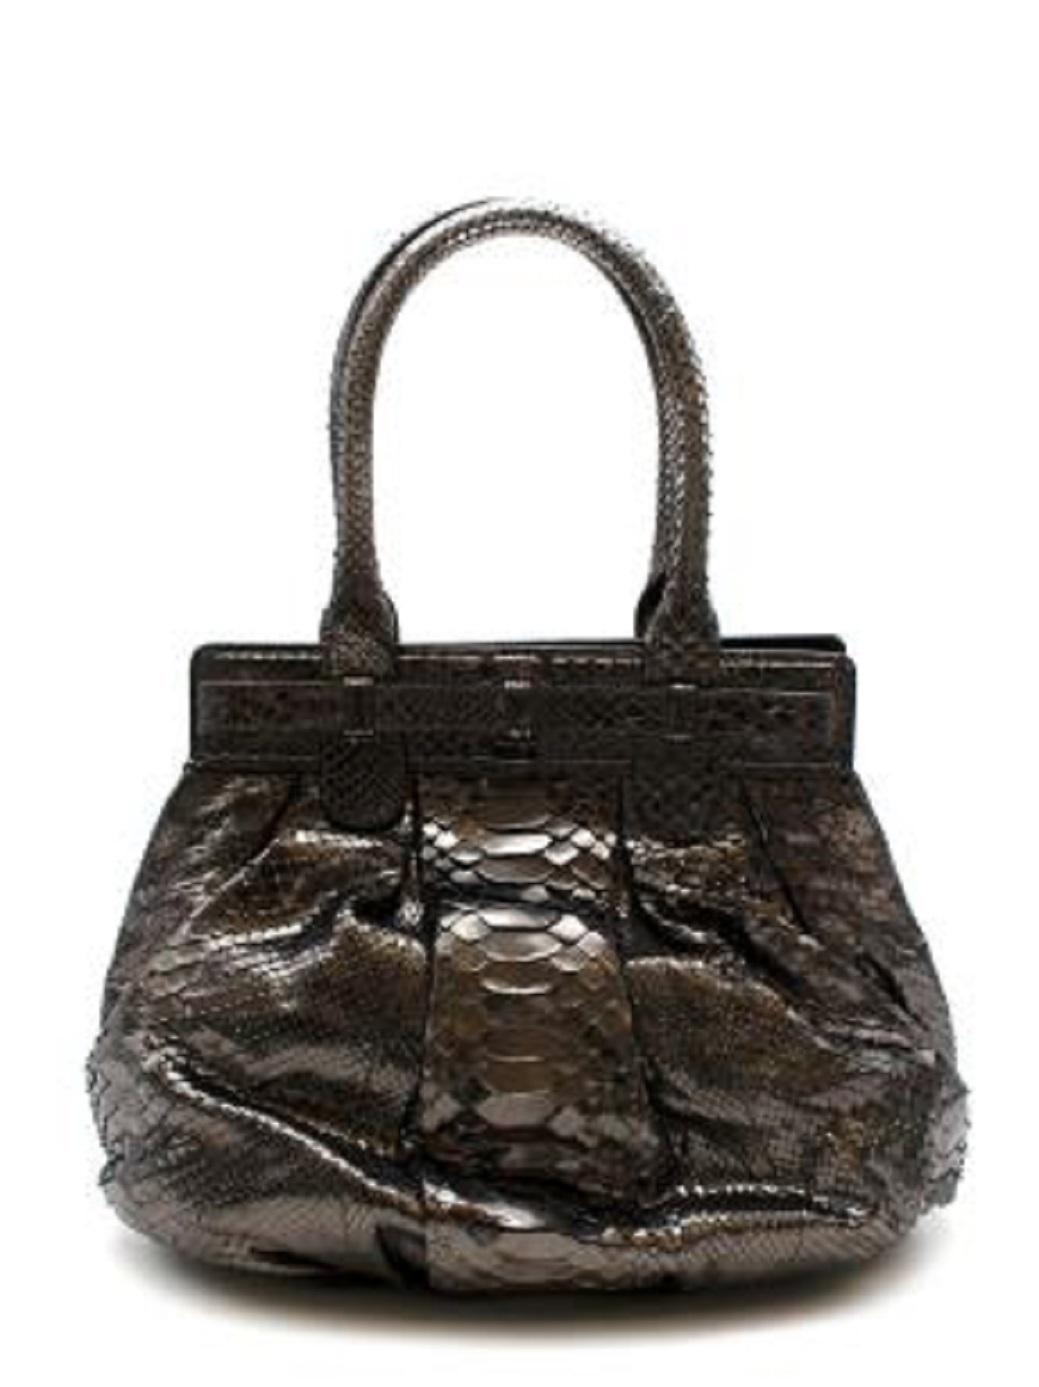 Zagliani Gunmetal Python Tote

- gunmetal tone python body
- round style
-turnlock closure

Condition 9/10. Great vintage condition

PLEASE NOTE, THESE ITEMS ARE PRE-OWNED AND MAY SHOW SIGNS OF BEING STORED EVEN WHEN UNWORN AND UNUSED. THIS IS